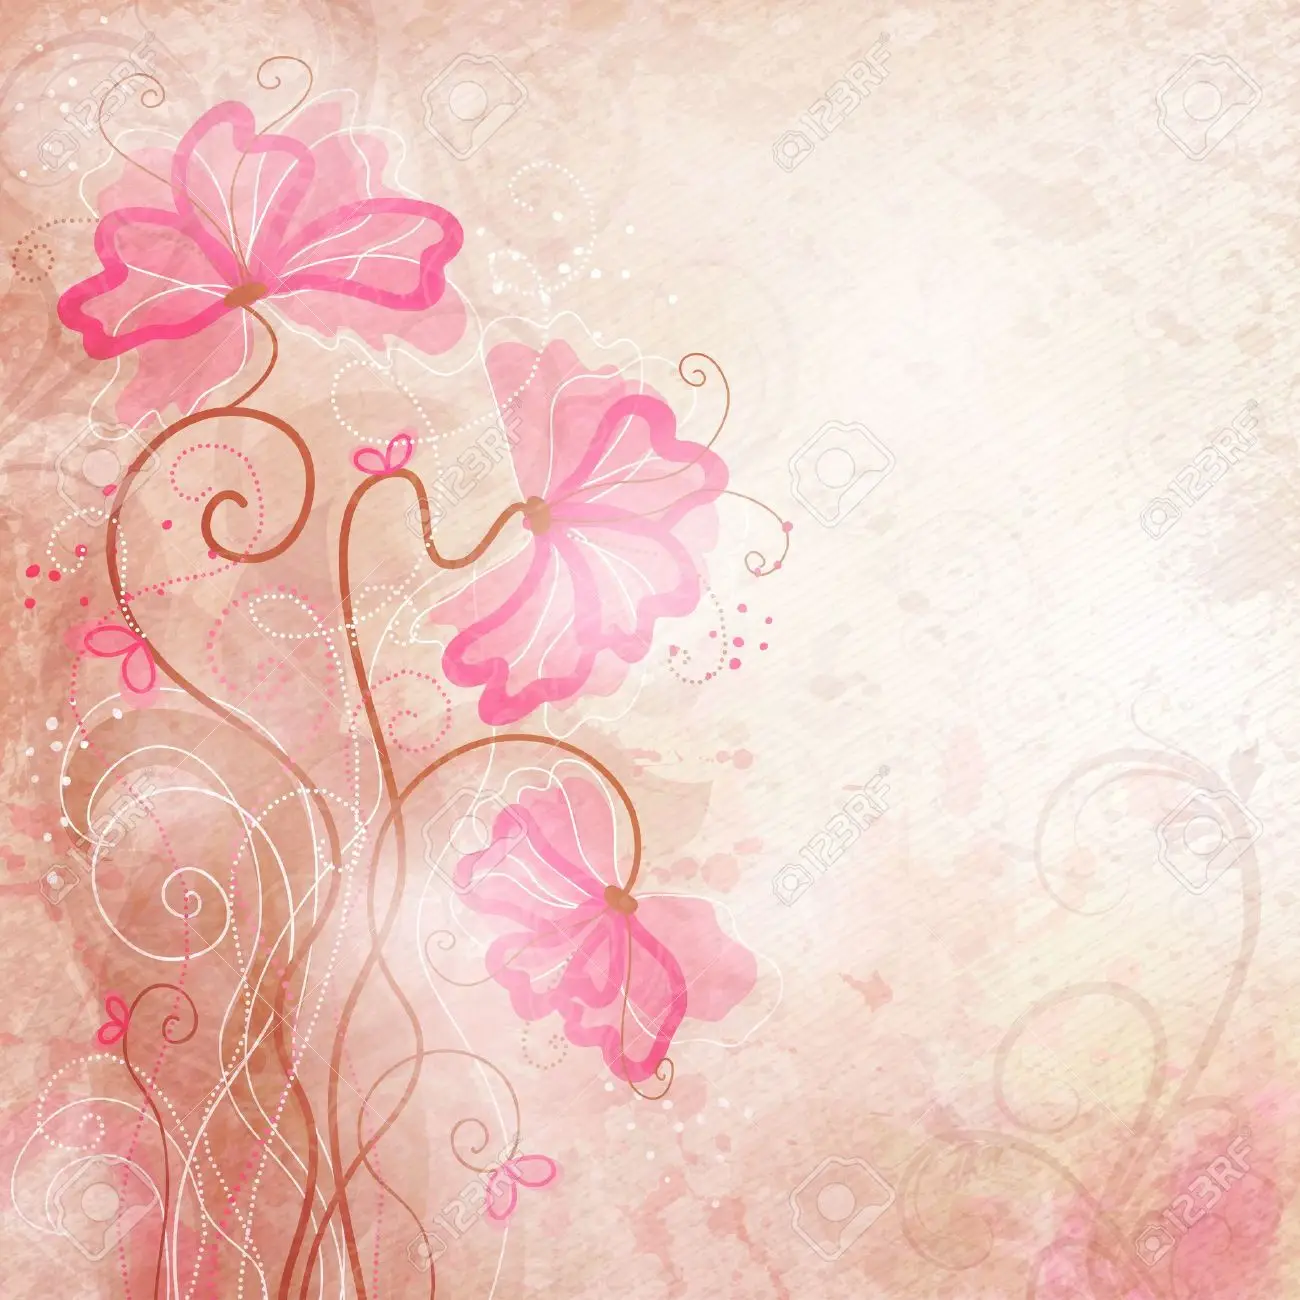 Romantic background royalty free svg cliparts vectors and stock illustration image